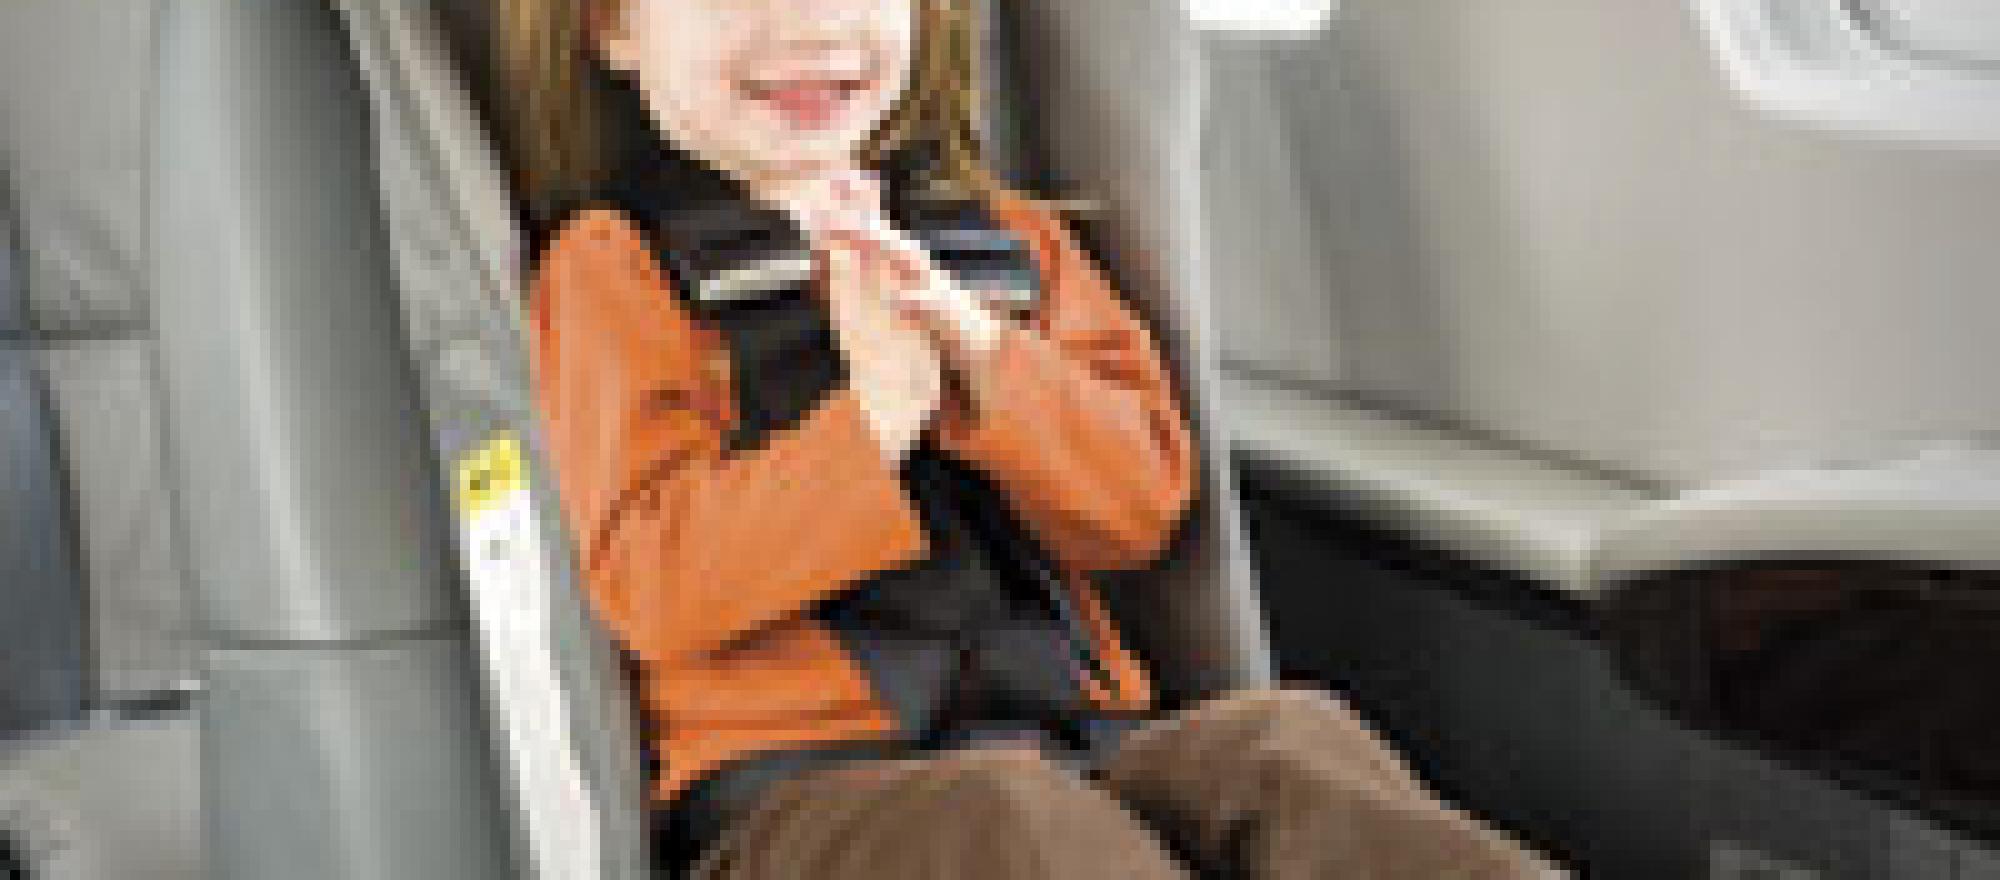 The FAA doesn't require child-restraint systems, but it recommends them. So d